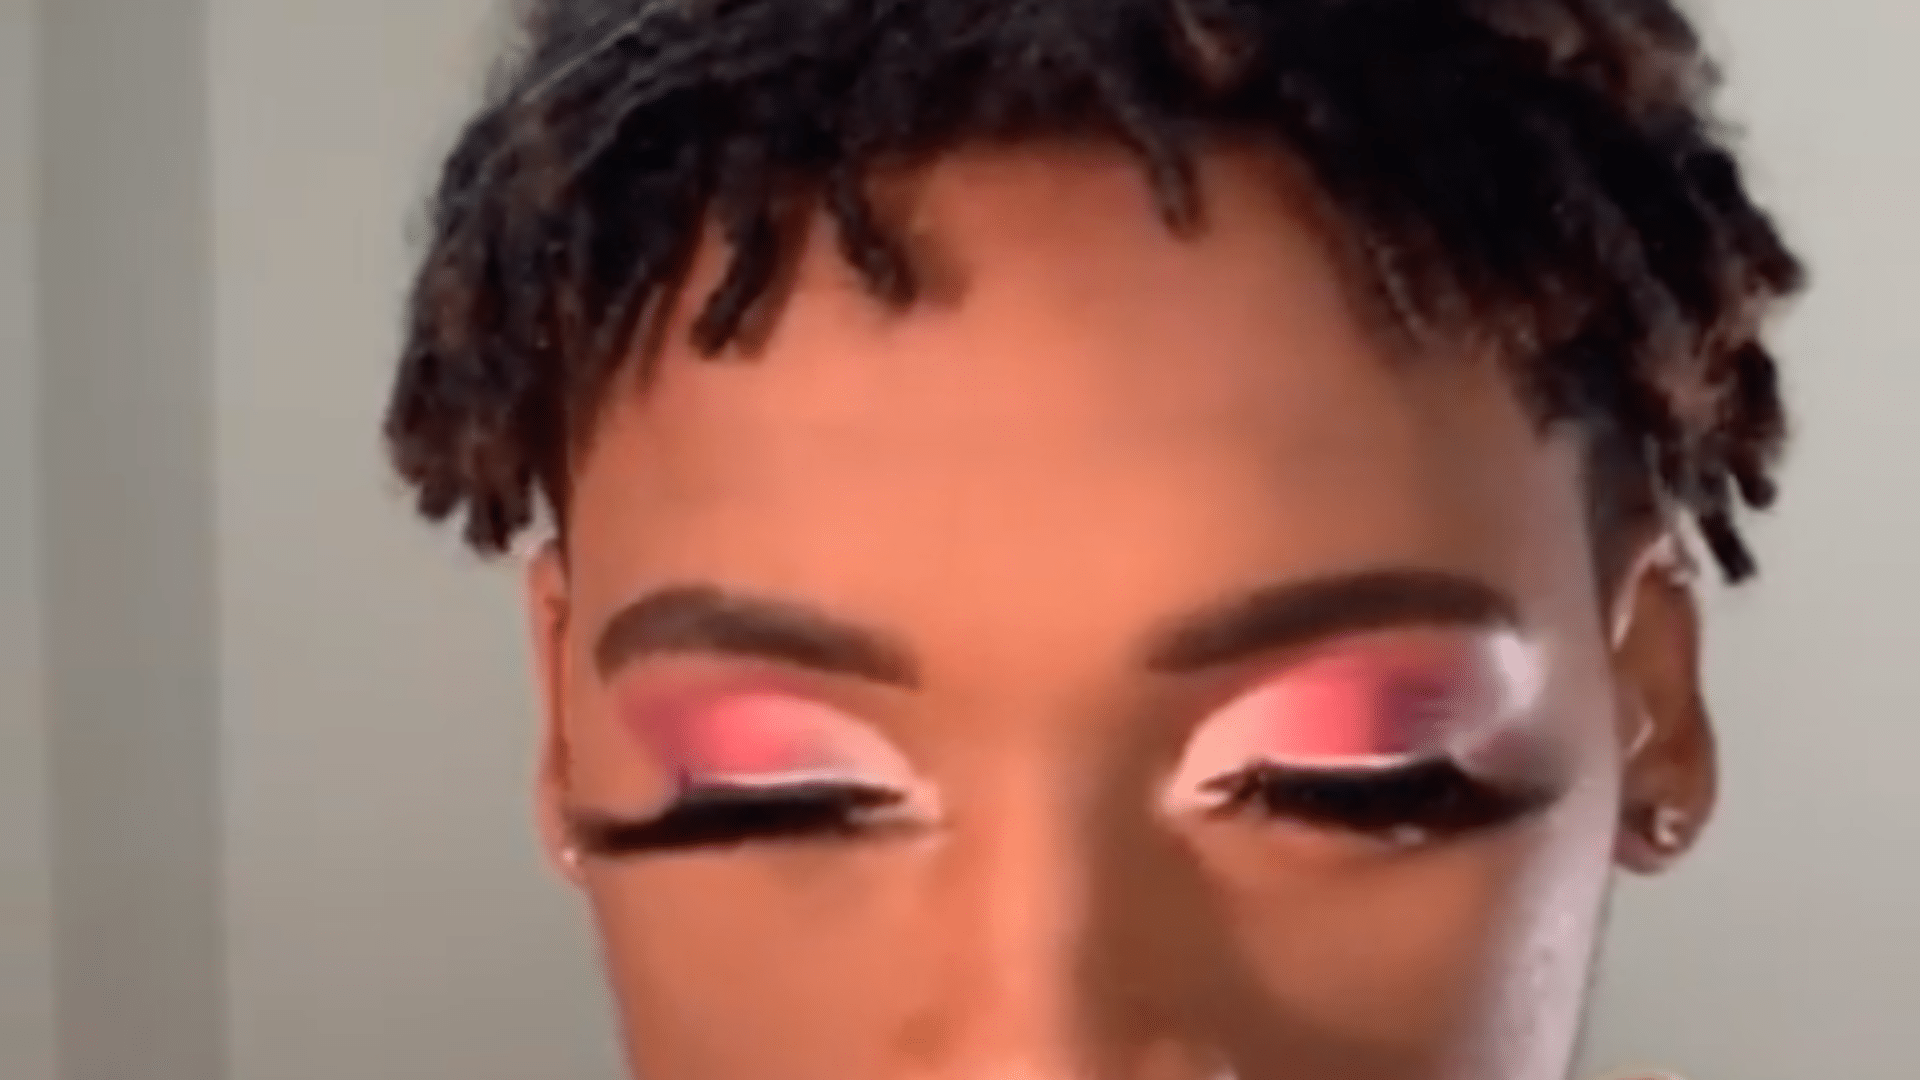 Now This Is Love! Boyfriend Goes Viral After Wearing His Girlfriend's Makeup To Help Promote Her Business